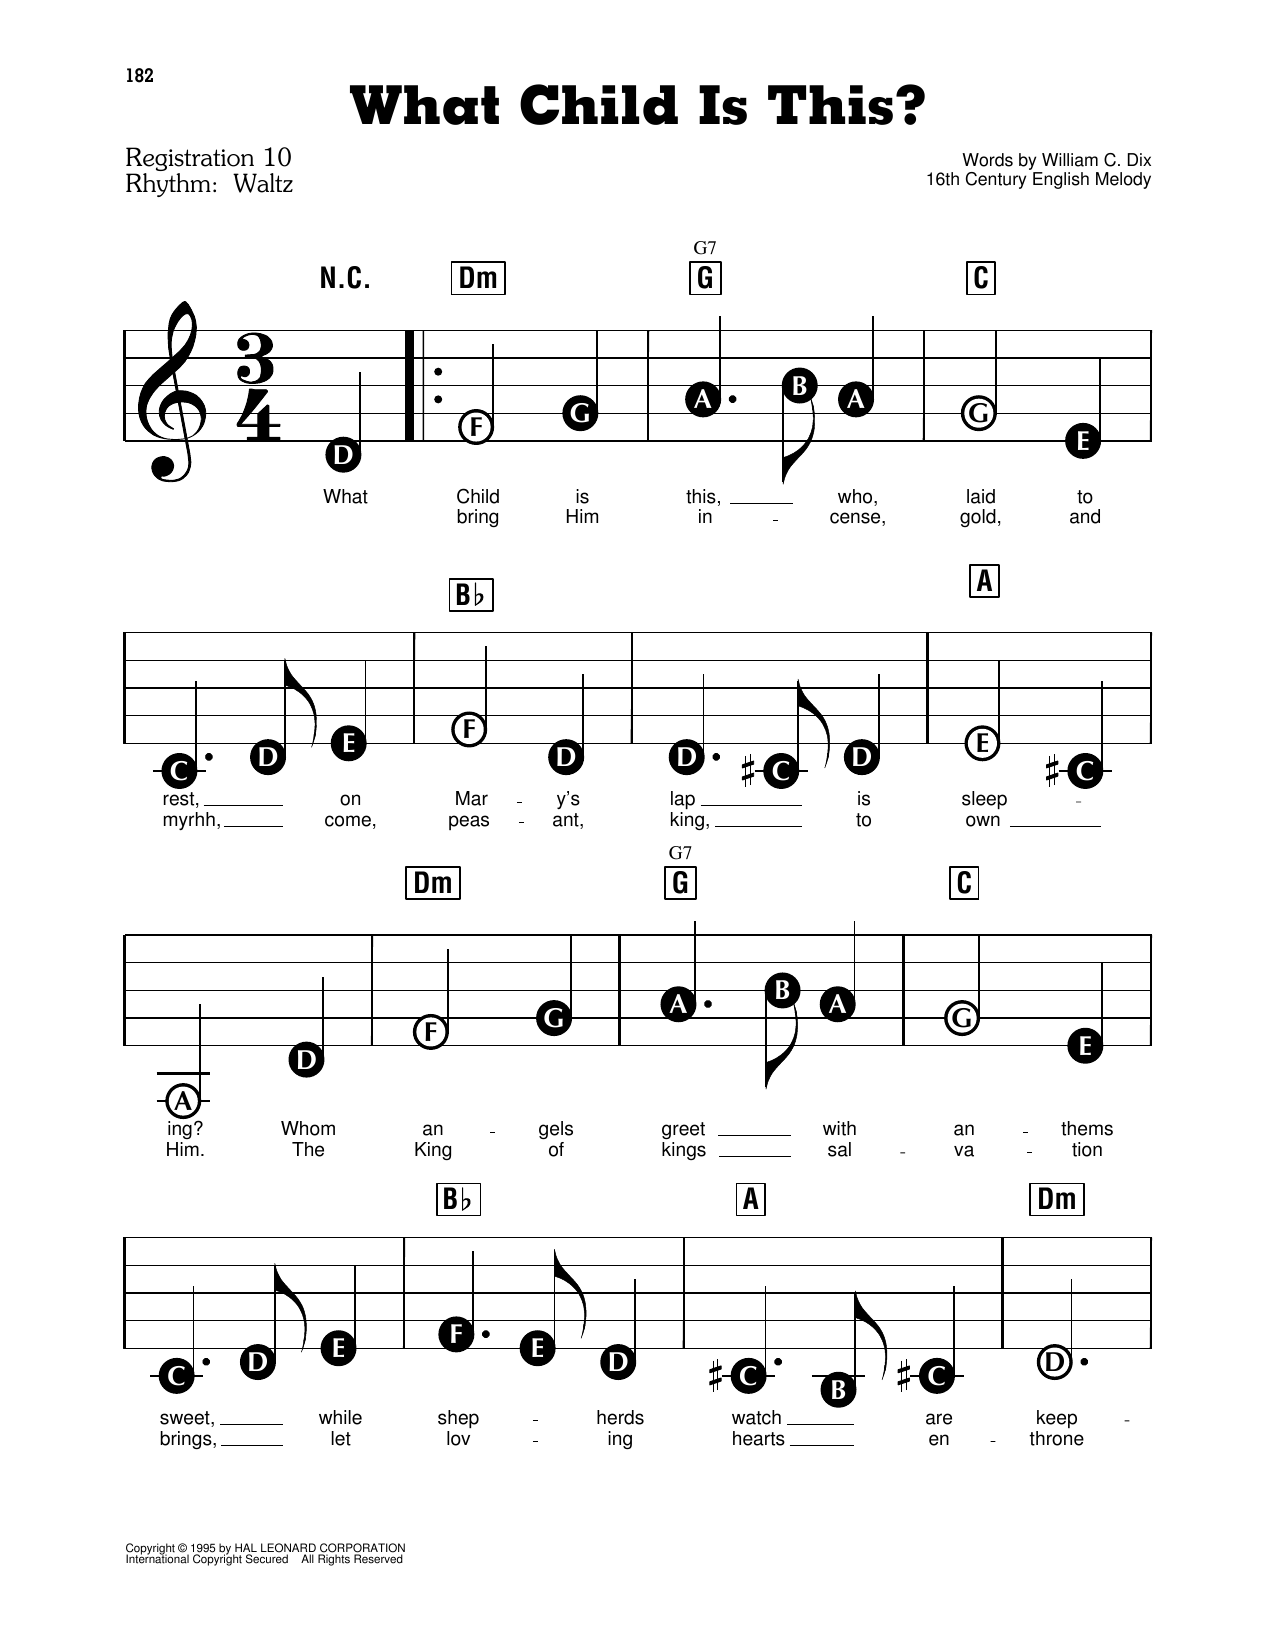 16th Century English Melody What Child Is This? sheet music notes and chords. Download Printable PDF.